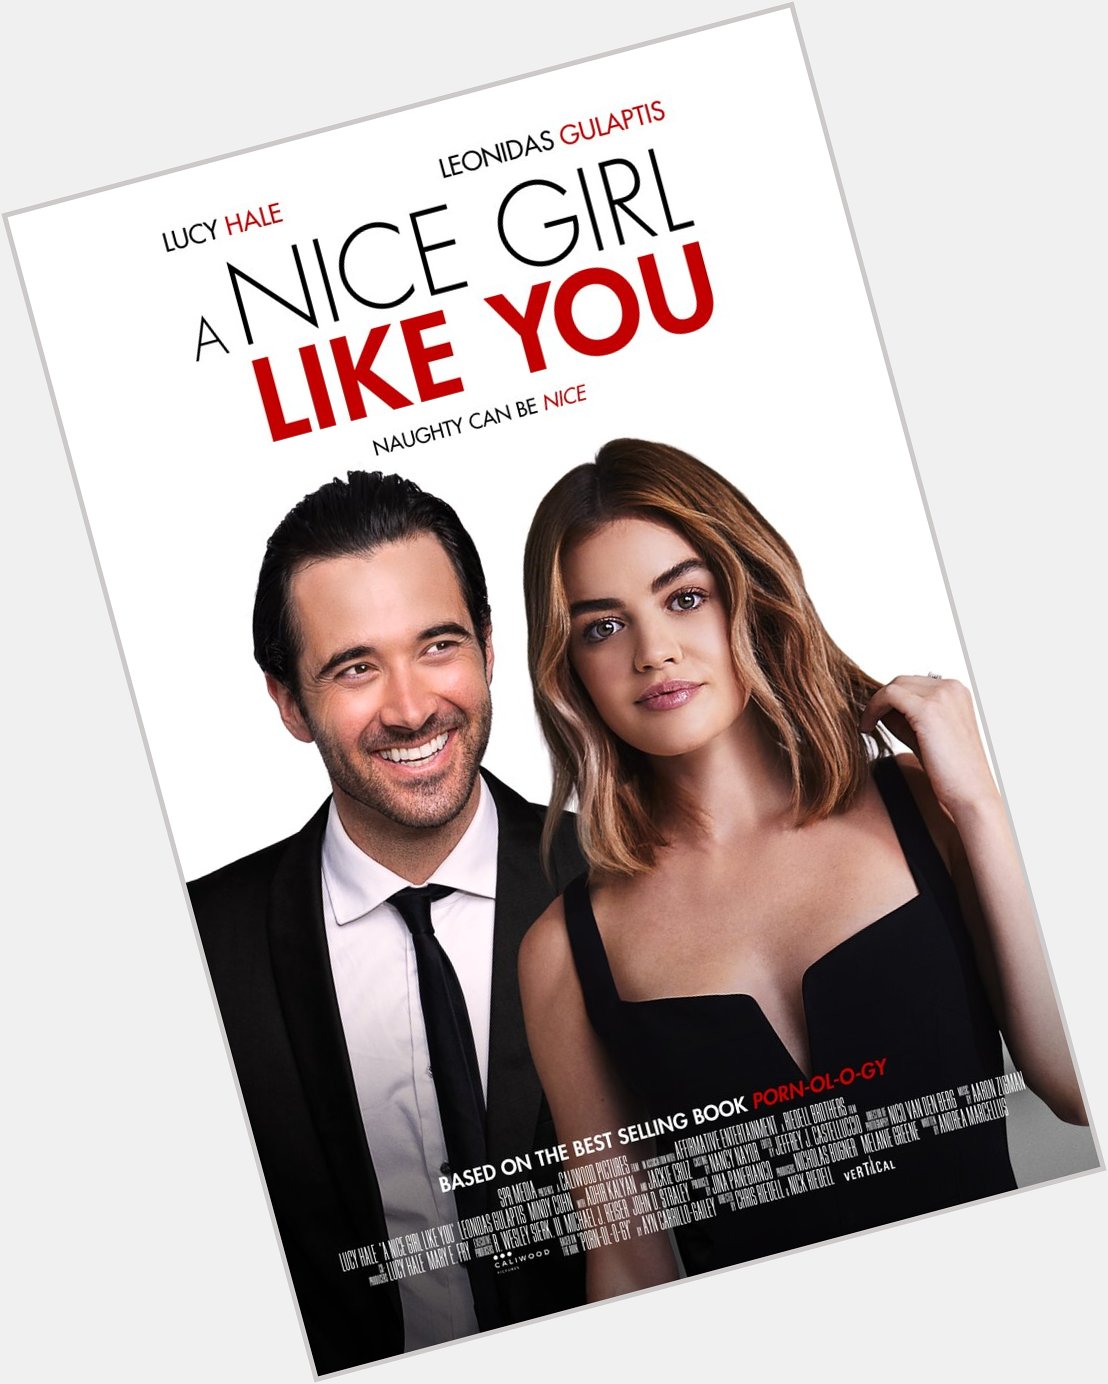 Today\s second movie , happy 33 birthday Lucy Hale !

(New watch) 